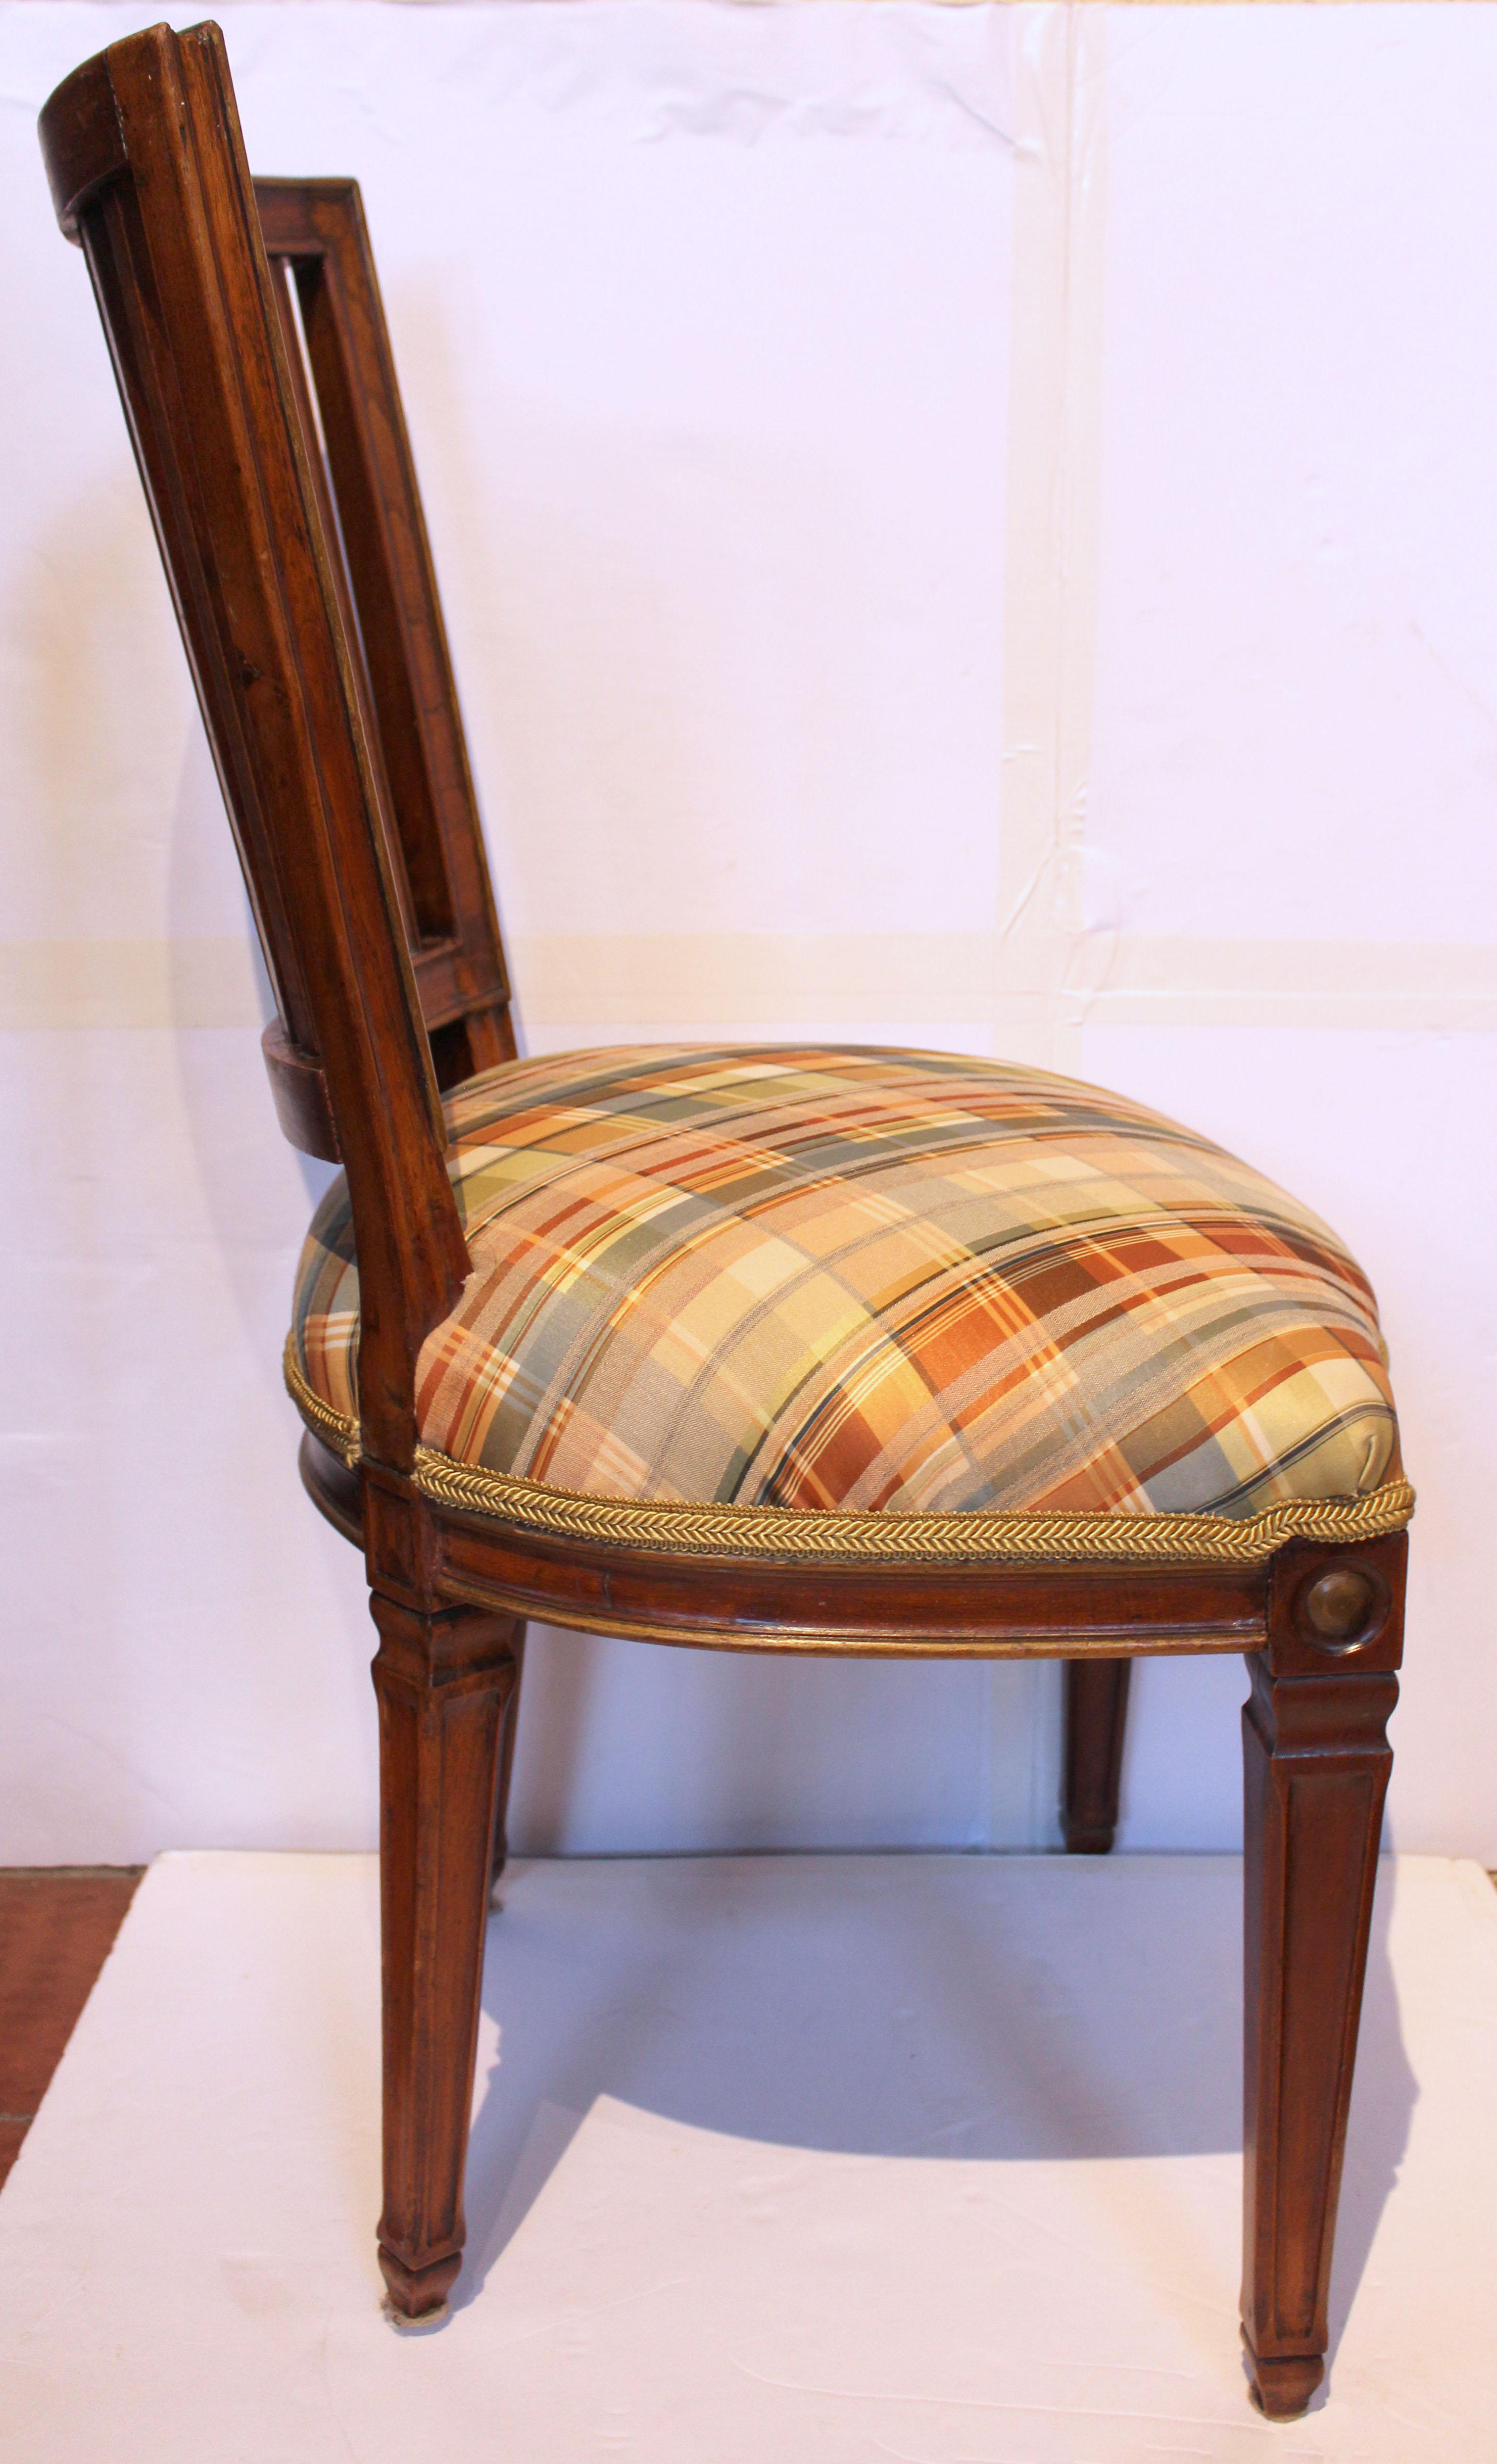 Circa 1870 French Louis XVI style side chair. Elegant, molded walnut frame carries through in design to the legs, aprons & back. Carved florets repeat from crest rail to front apron. Gilt detailing. Square, tapered legs with champhered edges ending